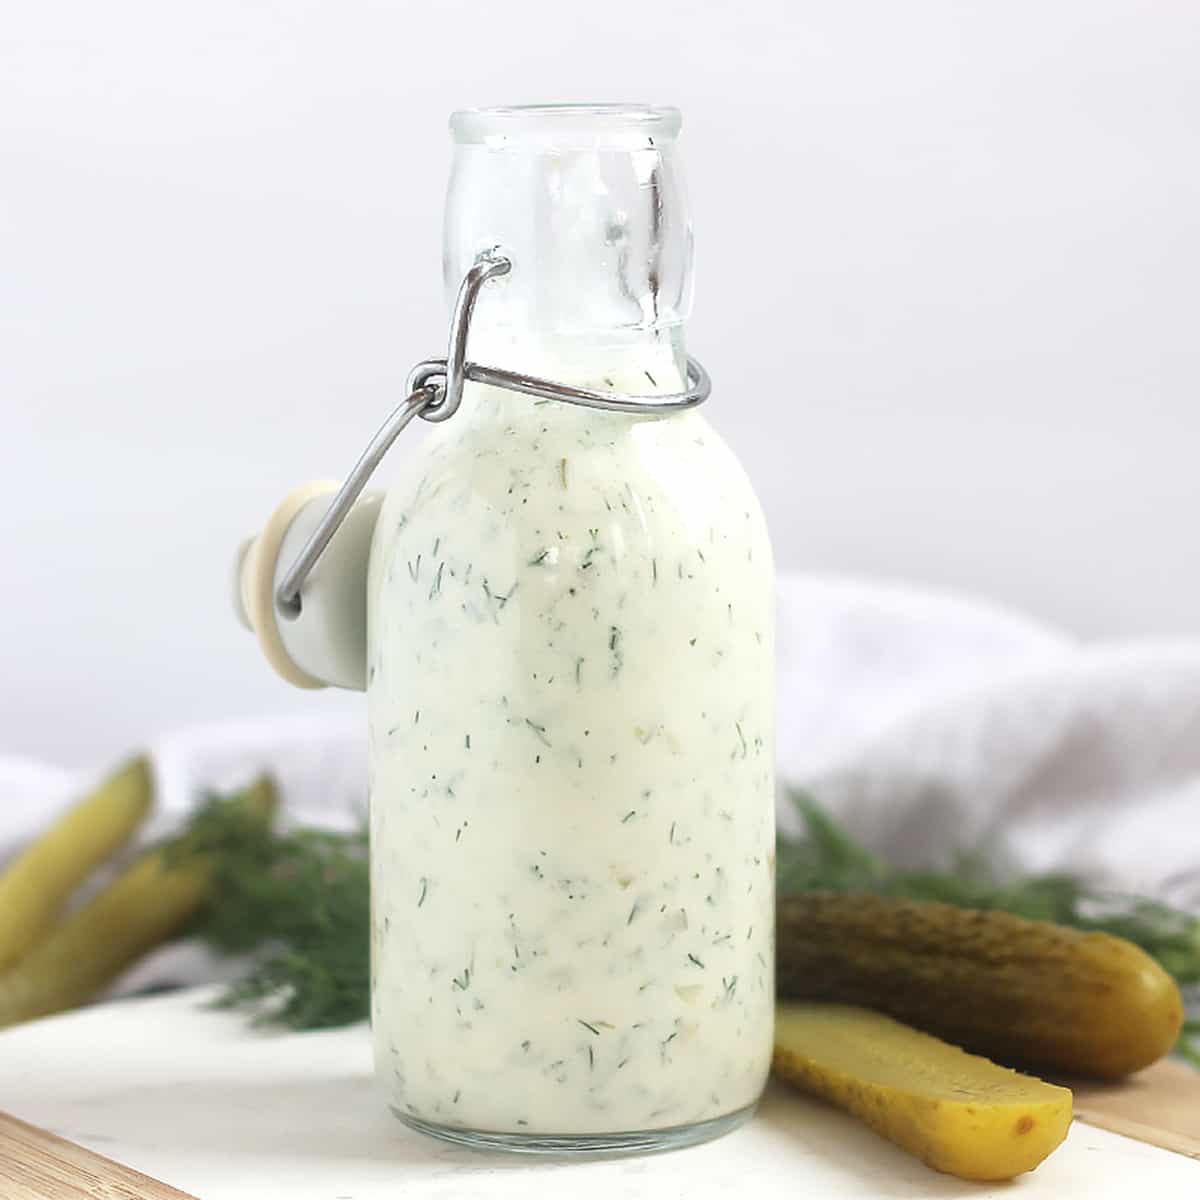 Creamy salad dressing next to fresh dill and cut pickles.